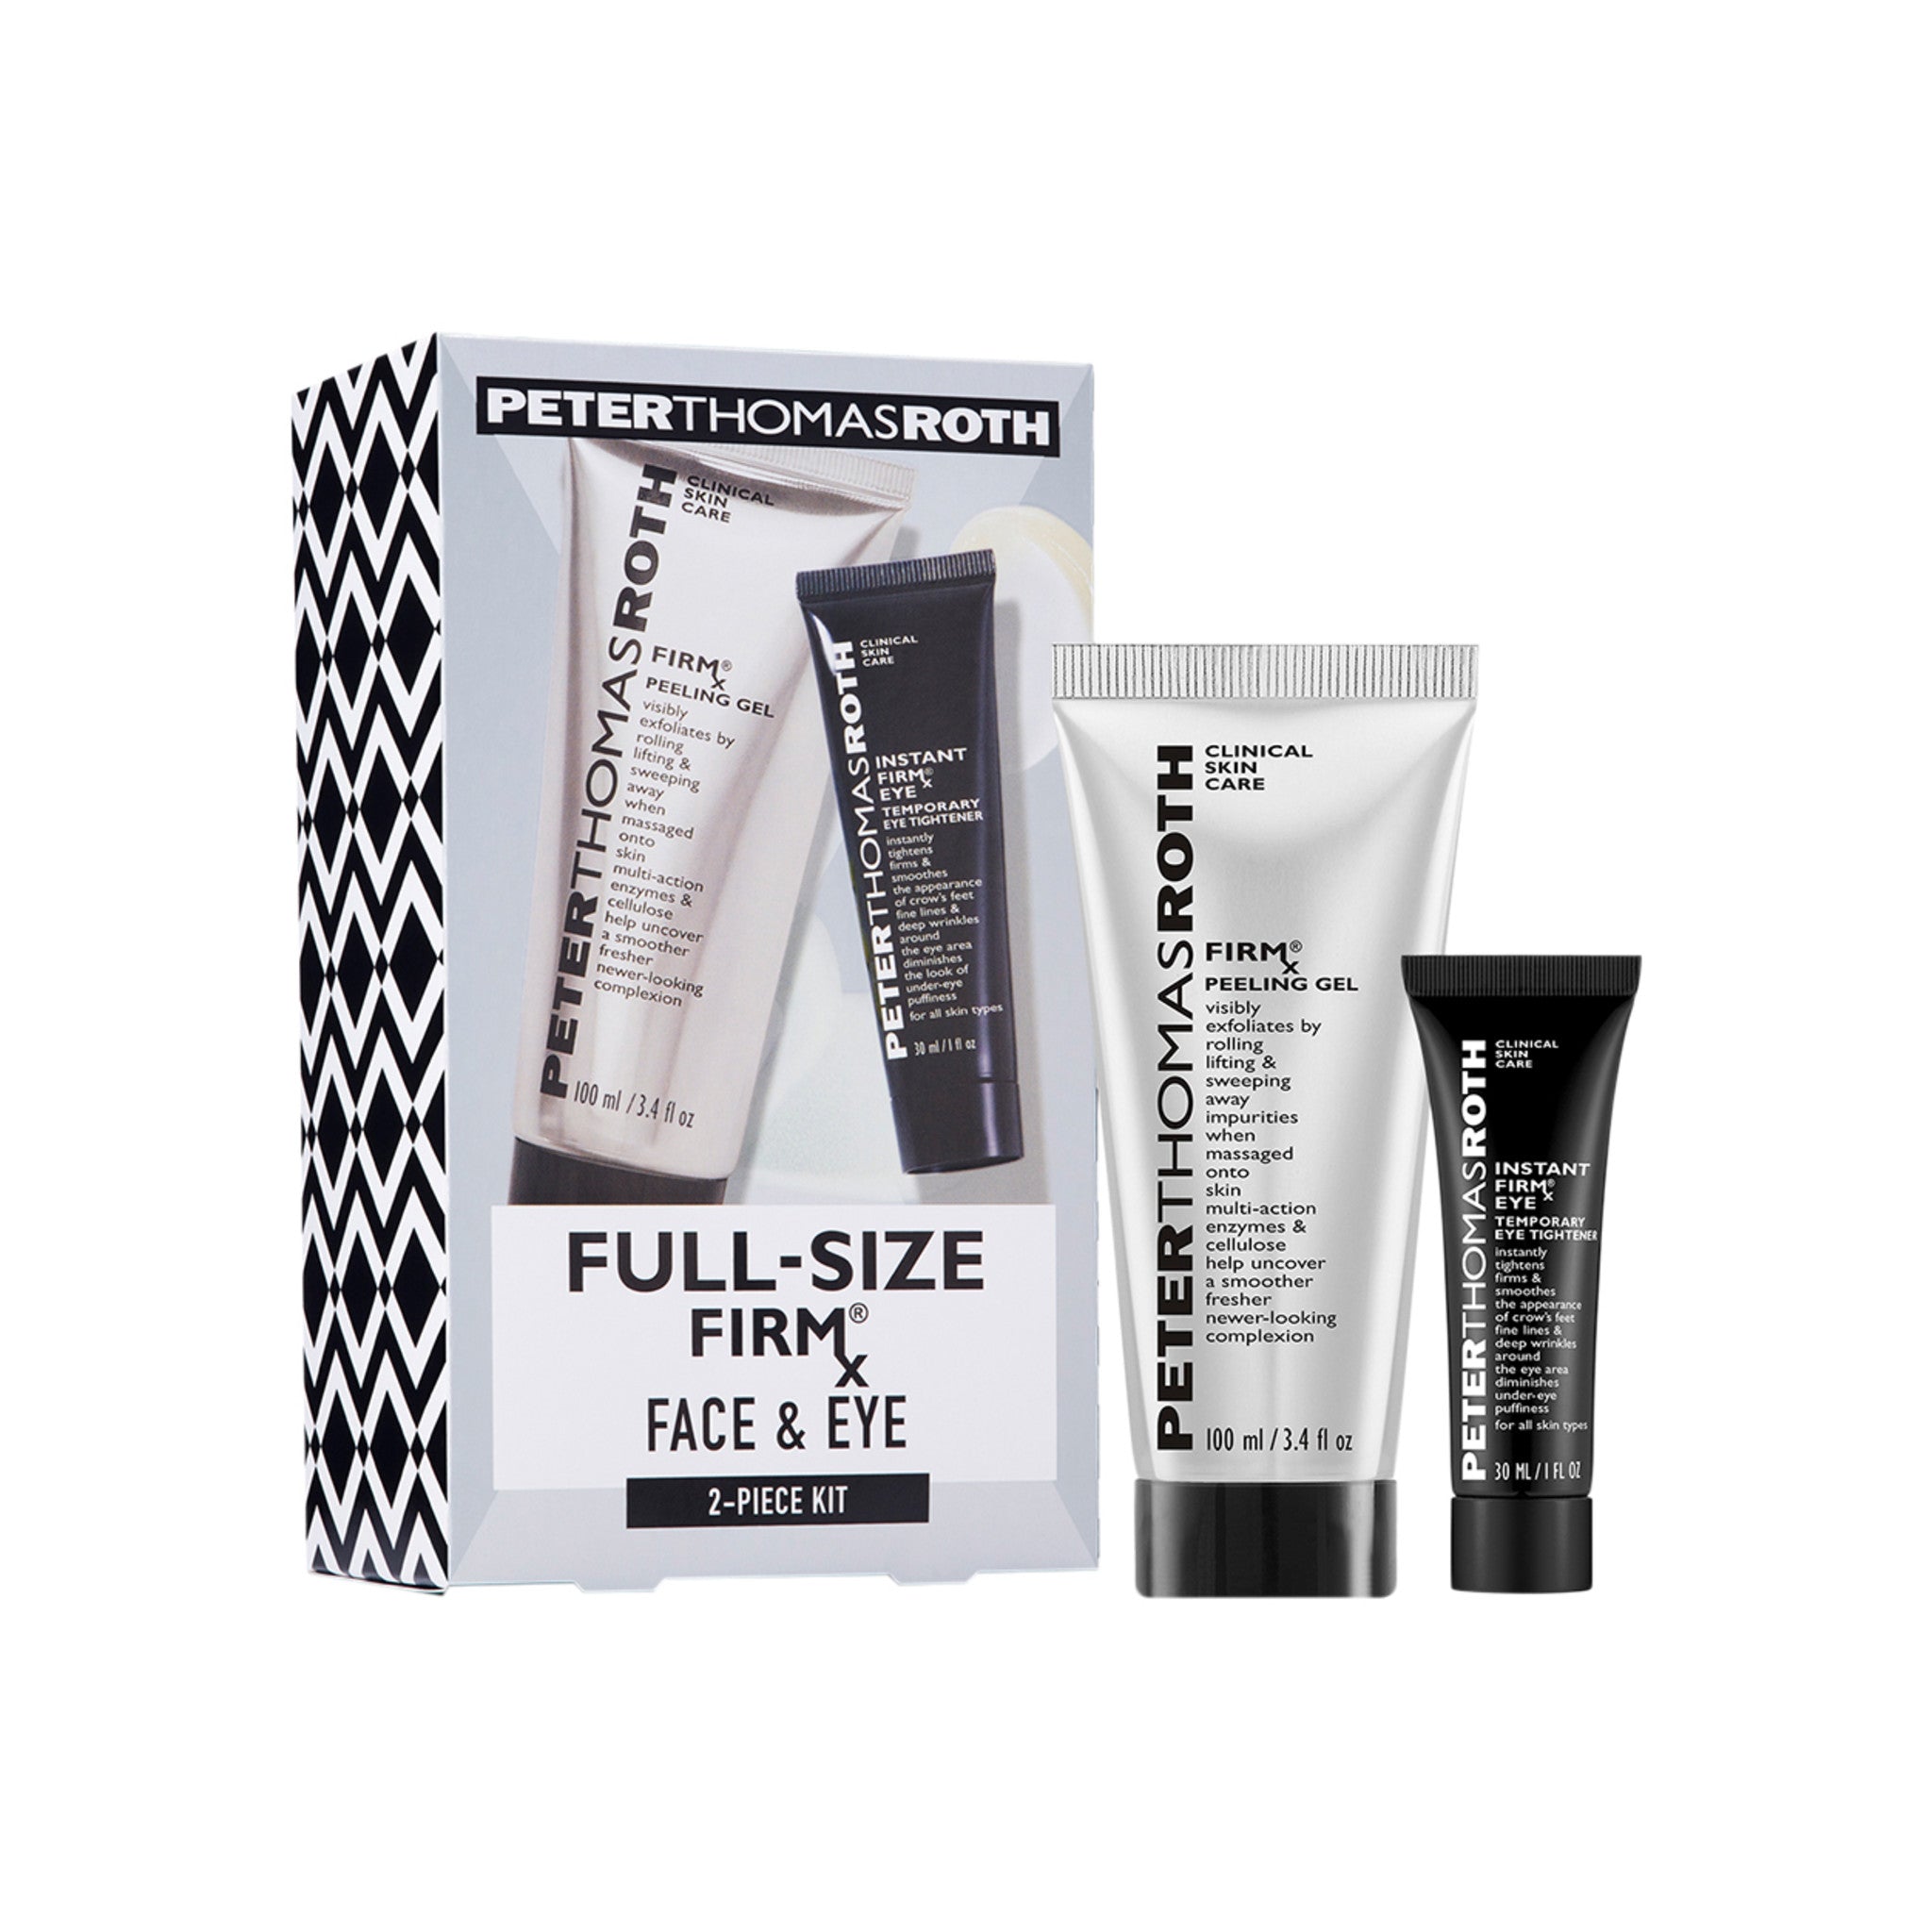 Peter Thomas Roth FIRMx Full-Size Face and Eye Power Pair 2-Piece Kit main image.